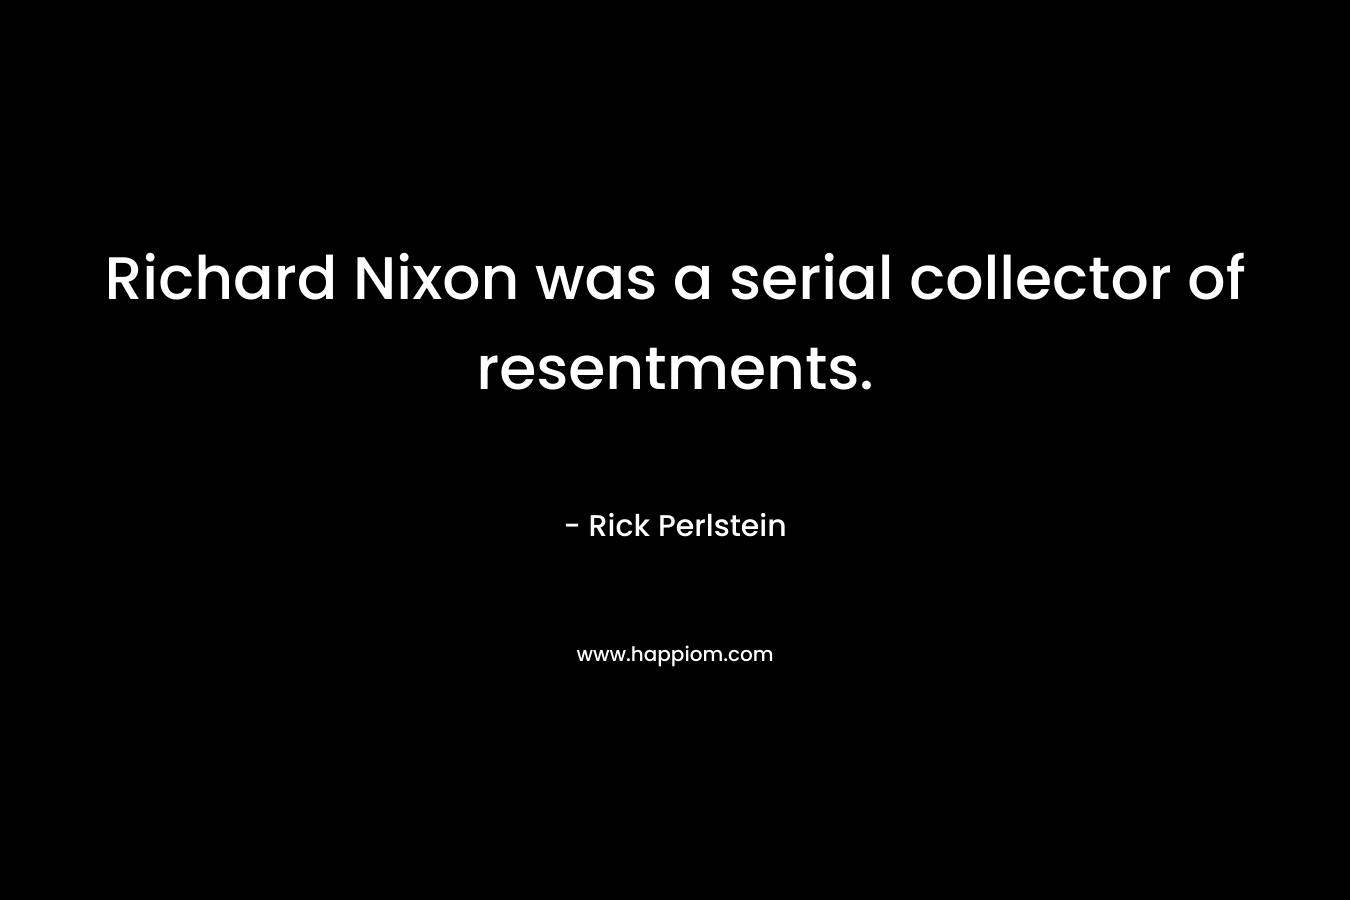 Richard Nixon was a serial collector of resentments. – Rick Perlstein